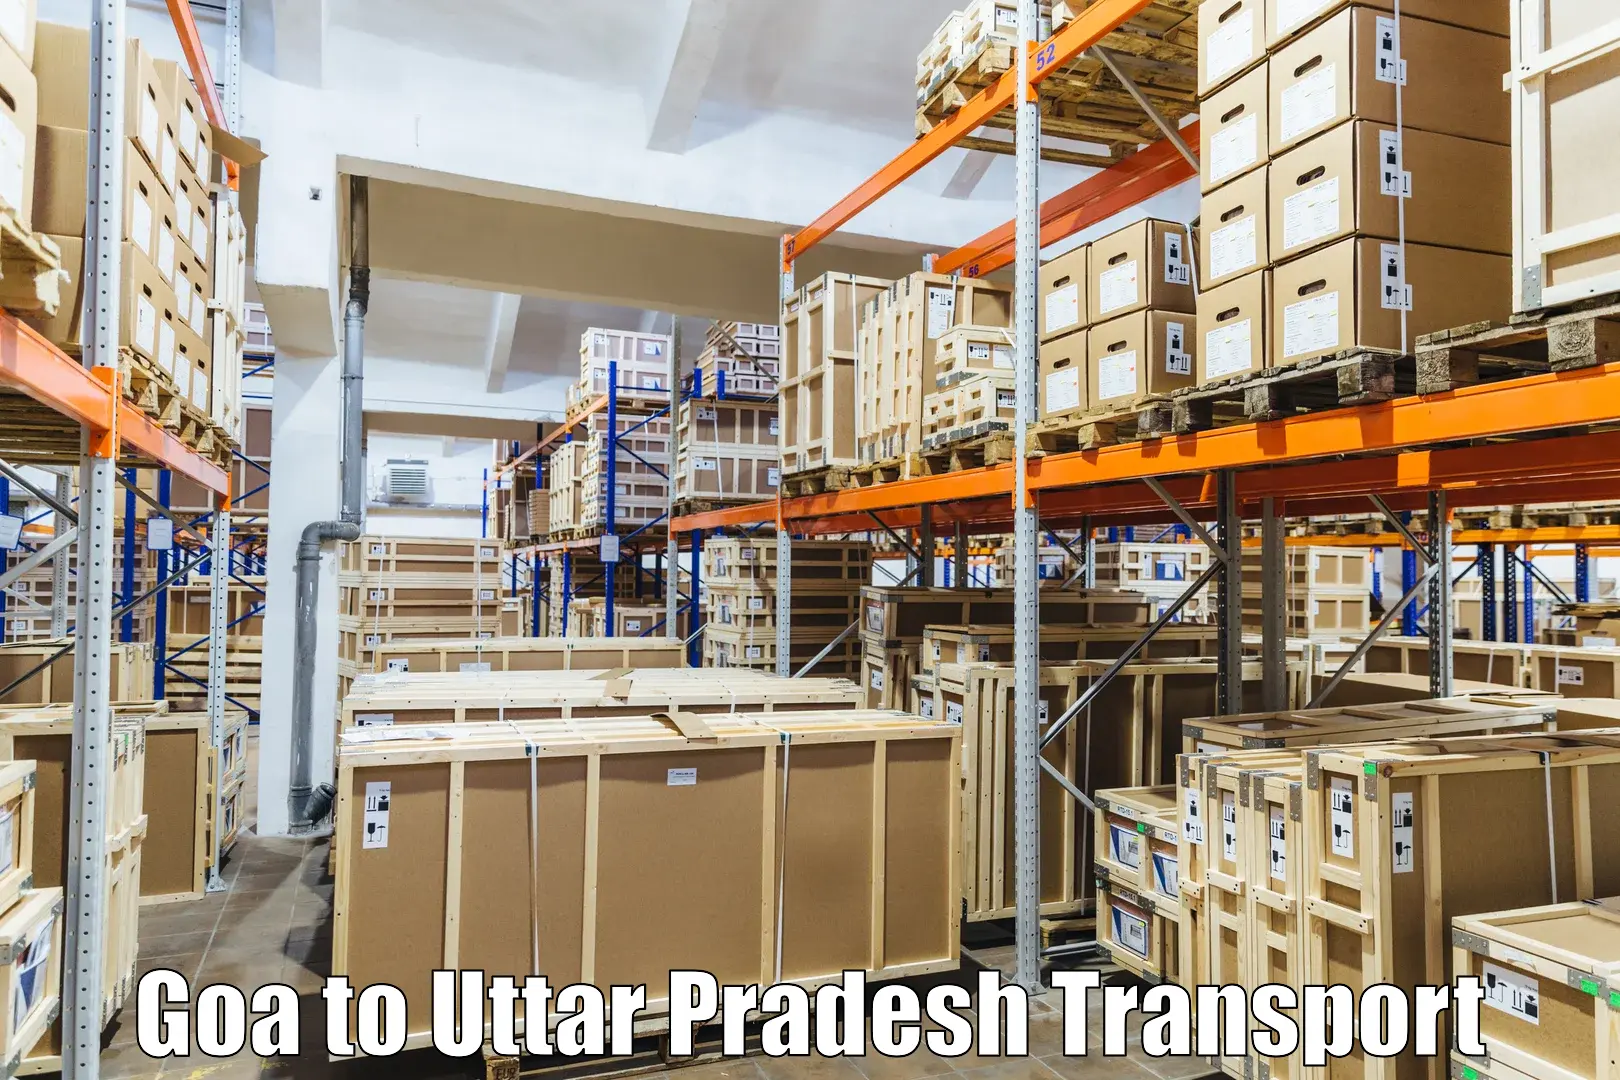 Parcel transport services Goa to Allahabad